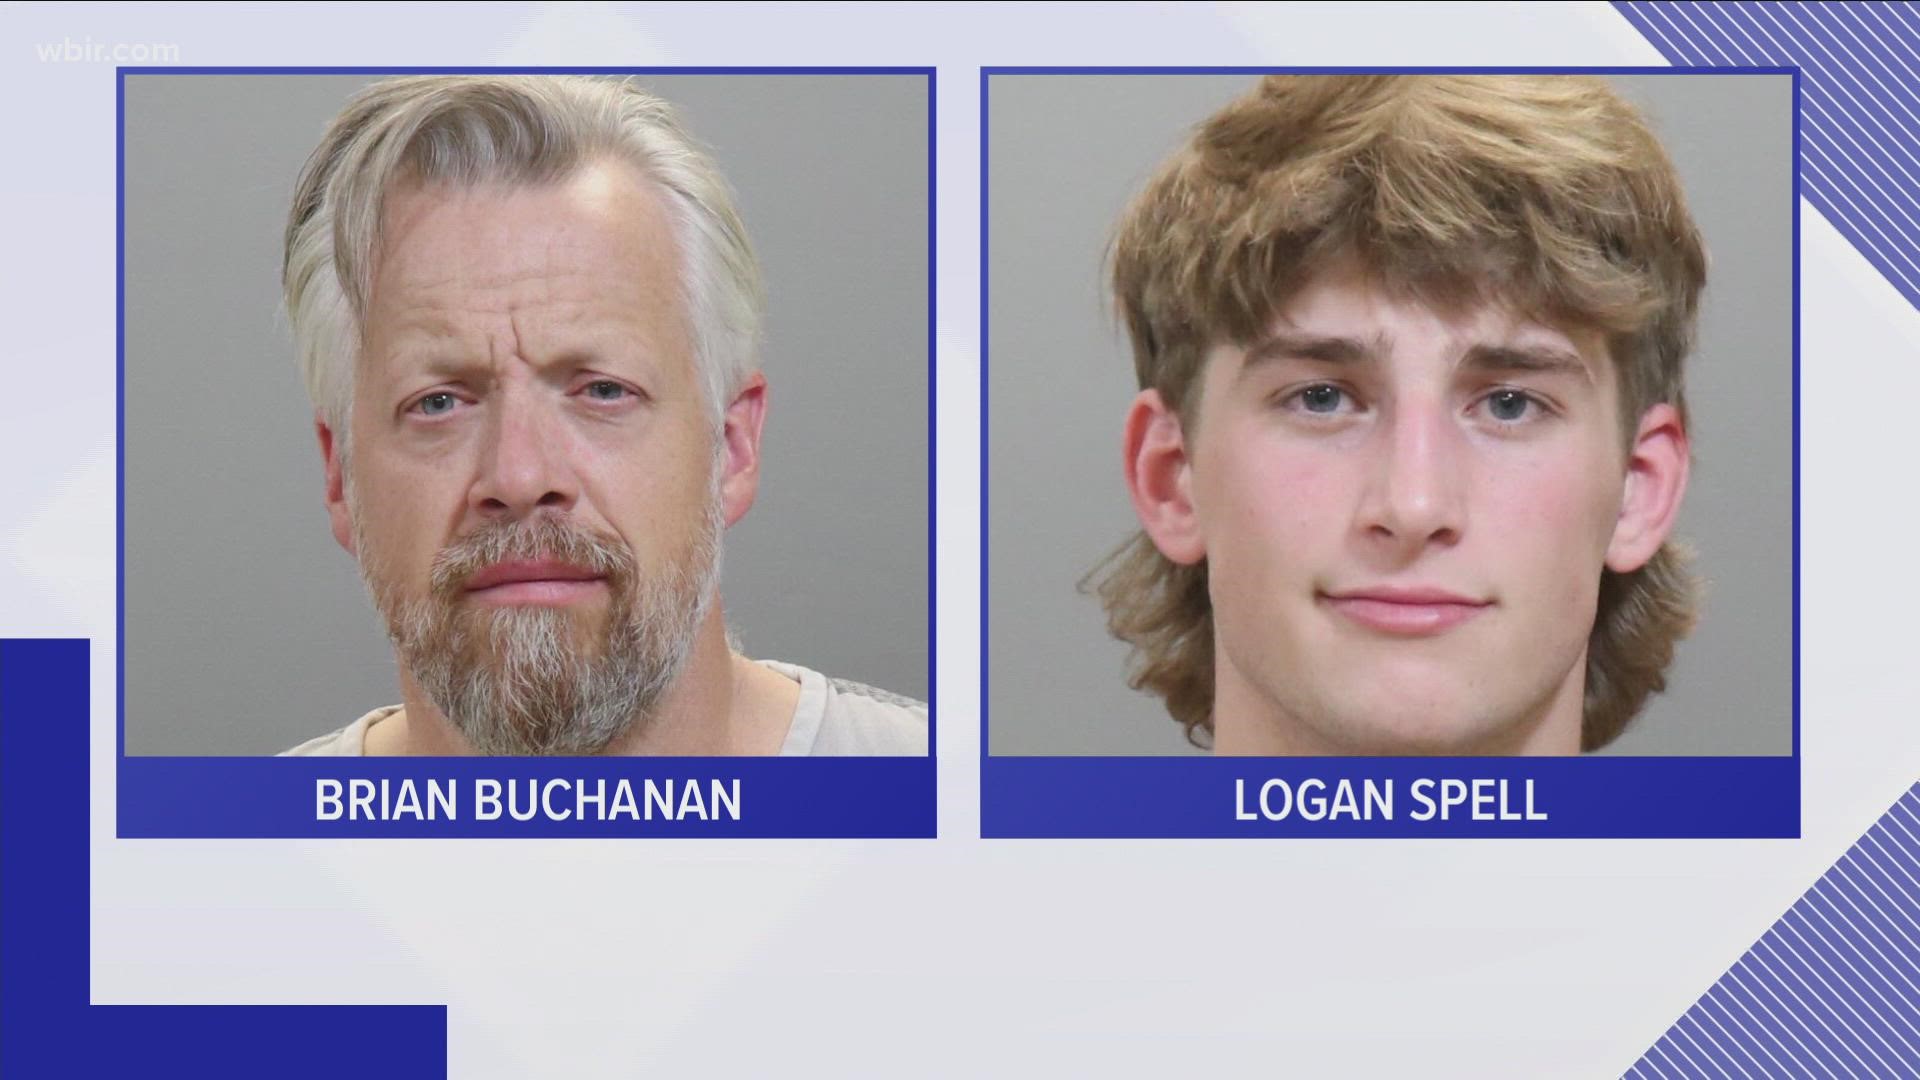 Both men face disorderly conduct charges, with one also facing public intoxication and the other charged with evading arrest.